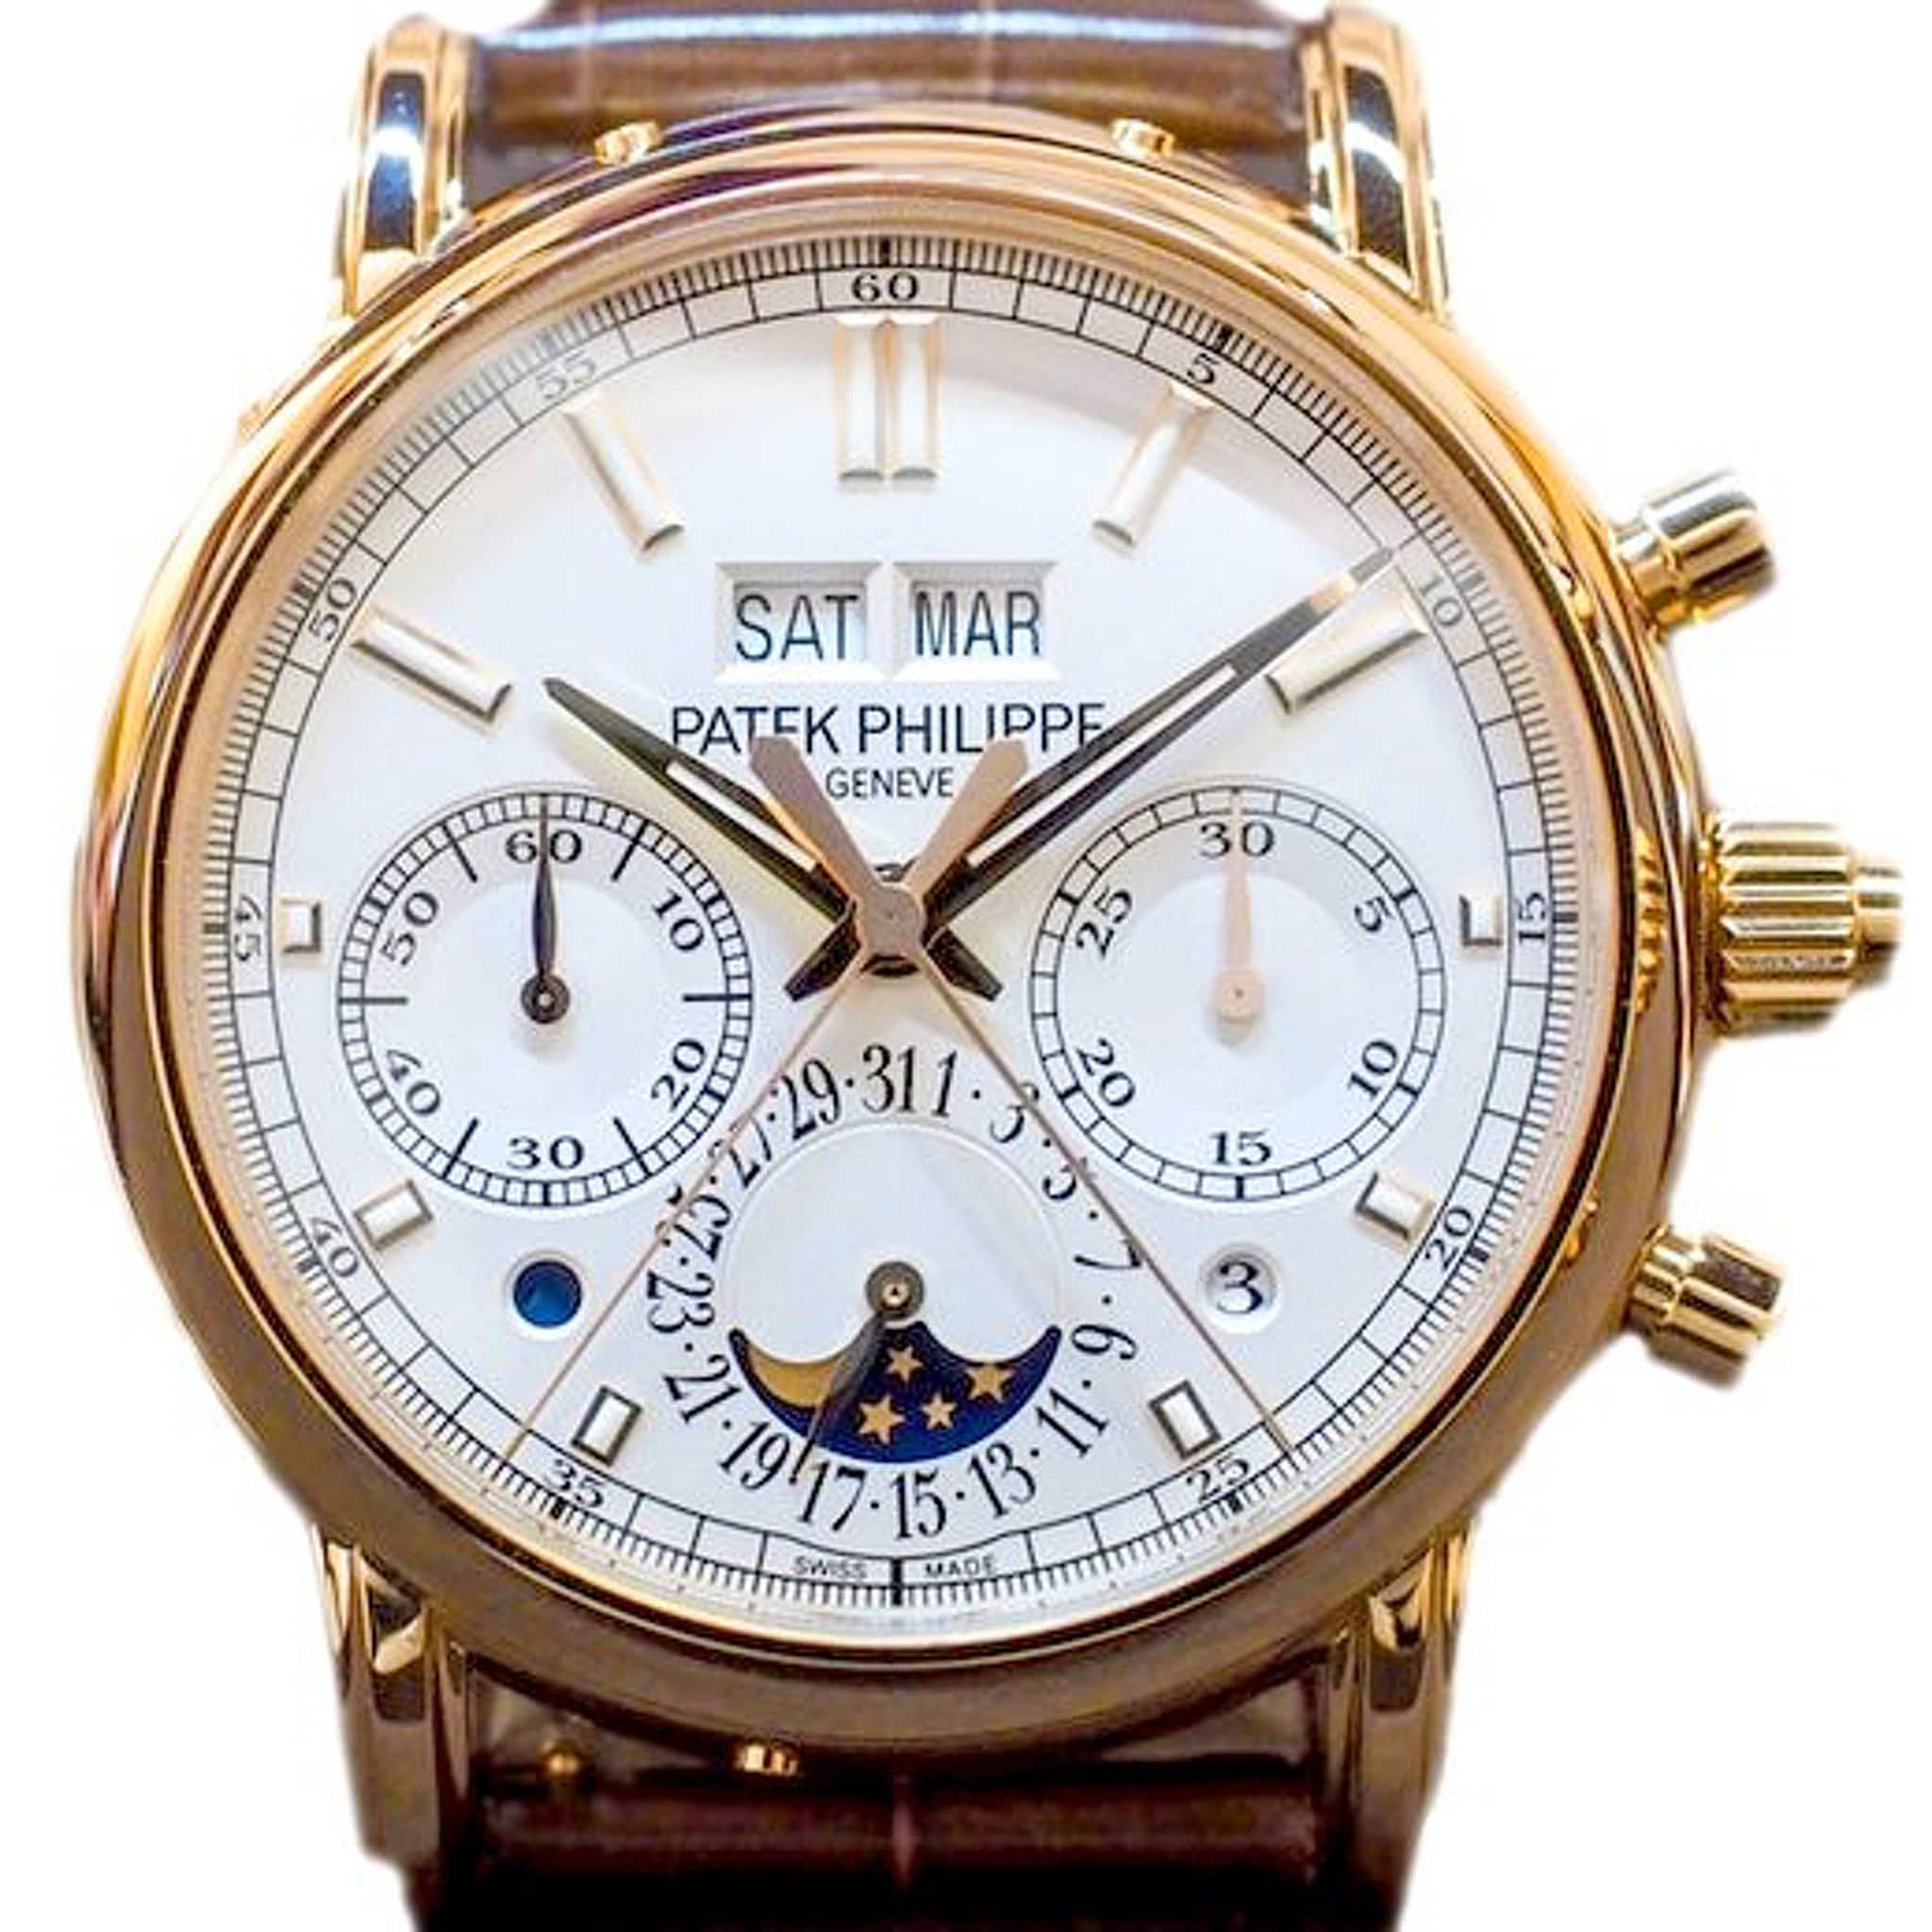 Patek Philippe’s Grand Complications collection.